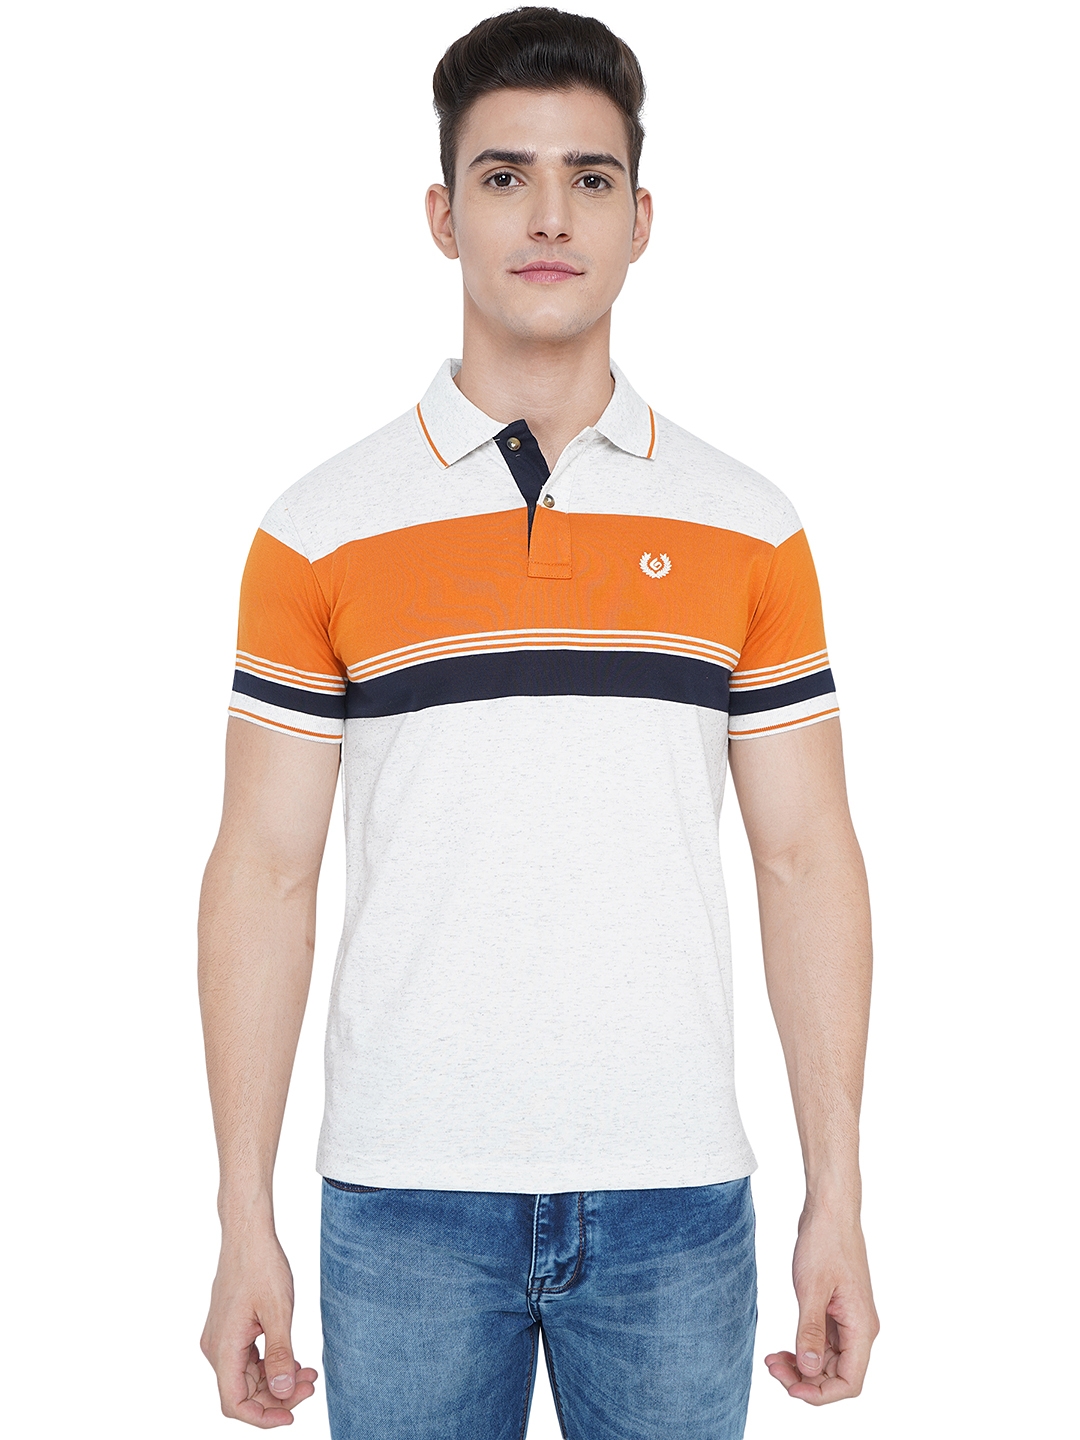 Greenfibre | White Striped Slim Fit Polo T-Shirt | Greenfibre